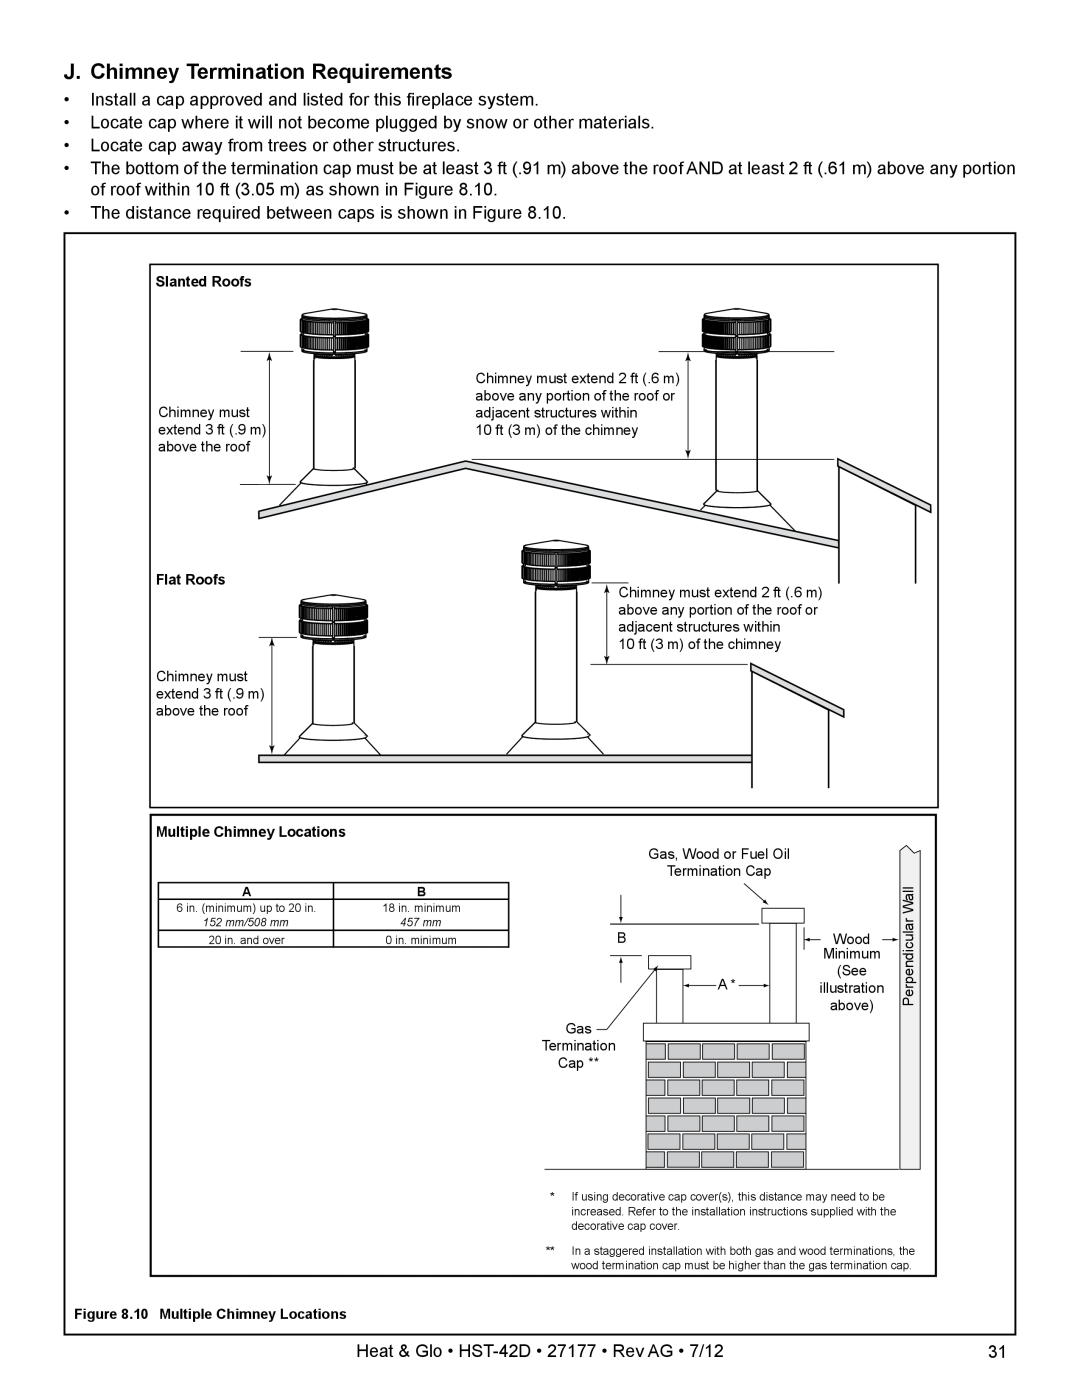 Heat & Glo LifeStyle HST-42D owner manual J. Chimney Termination Requirements 